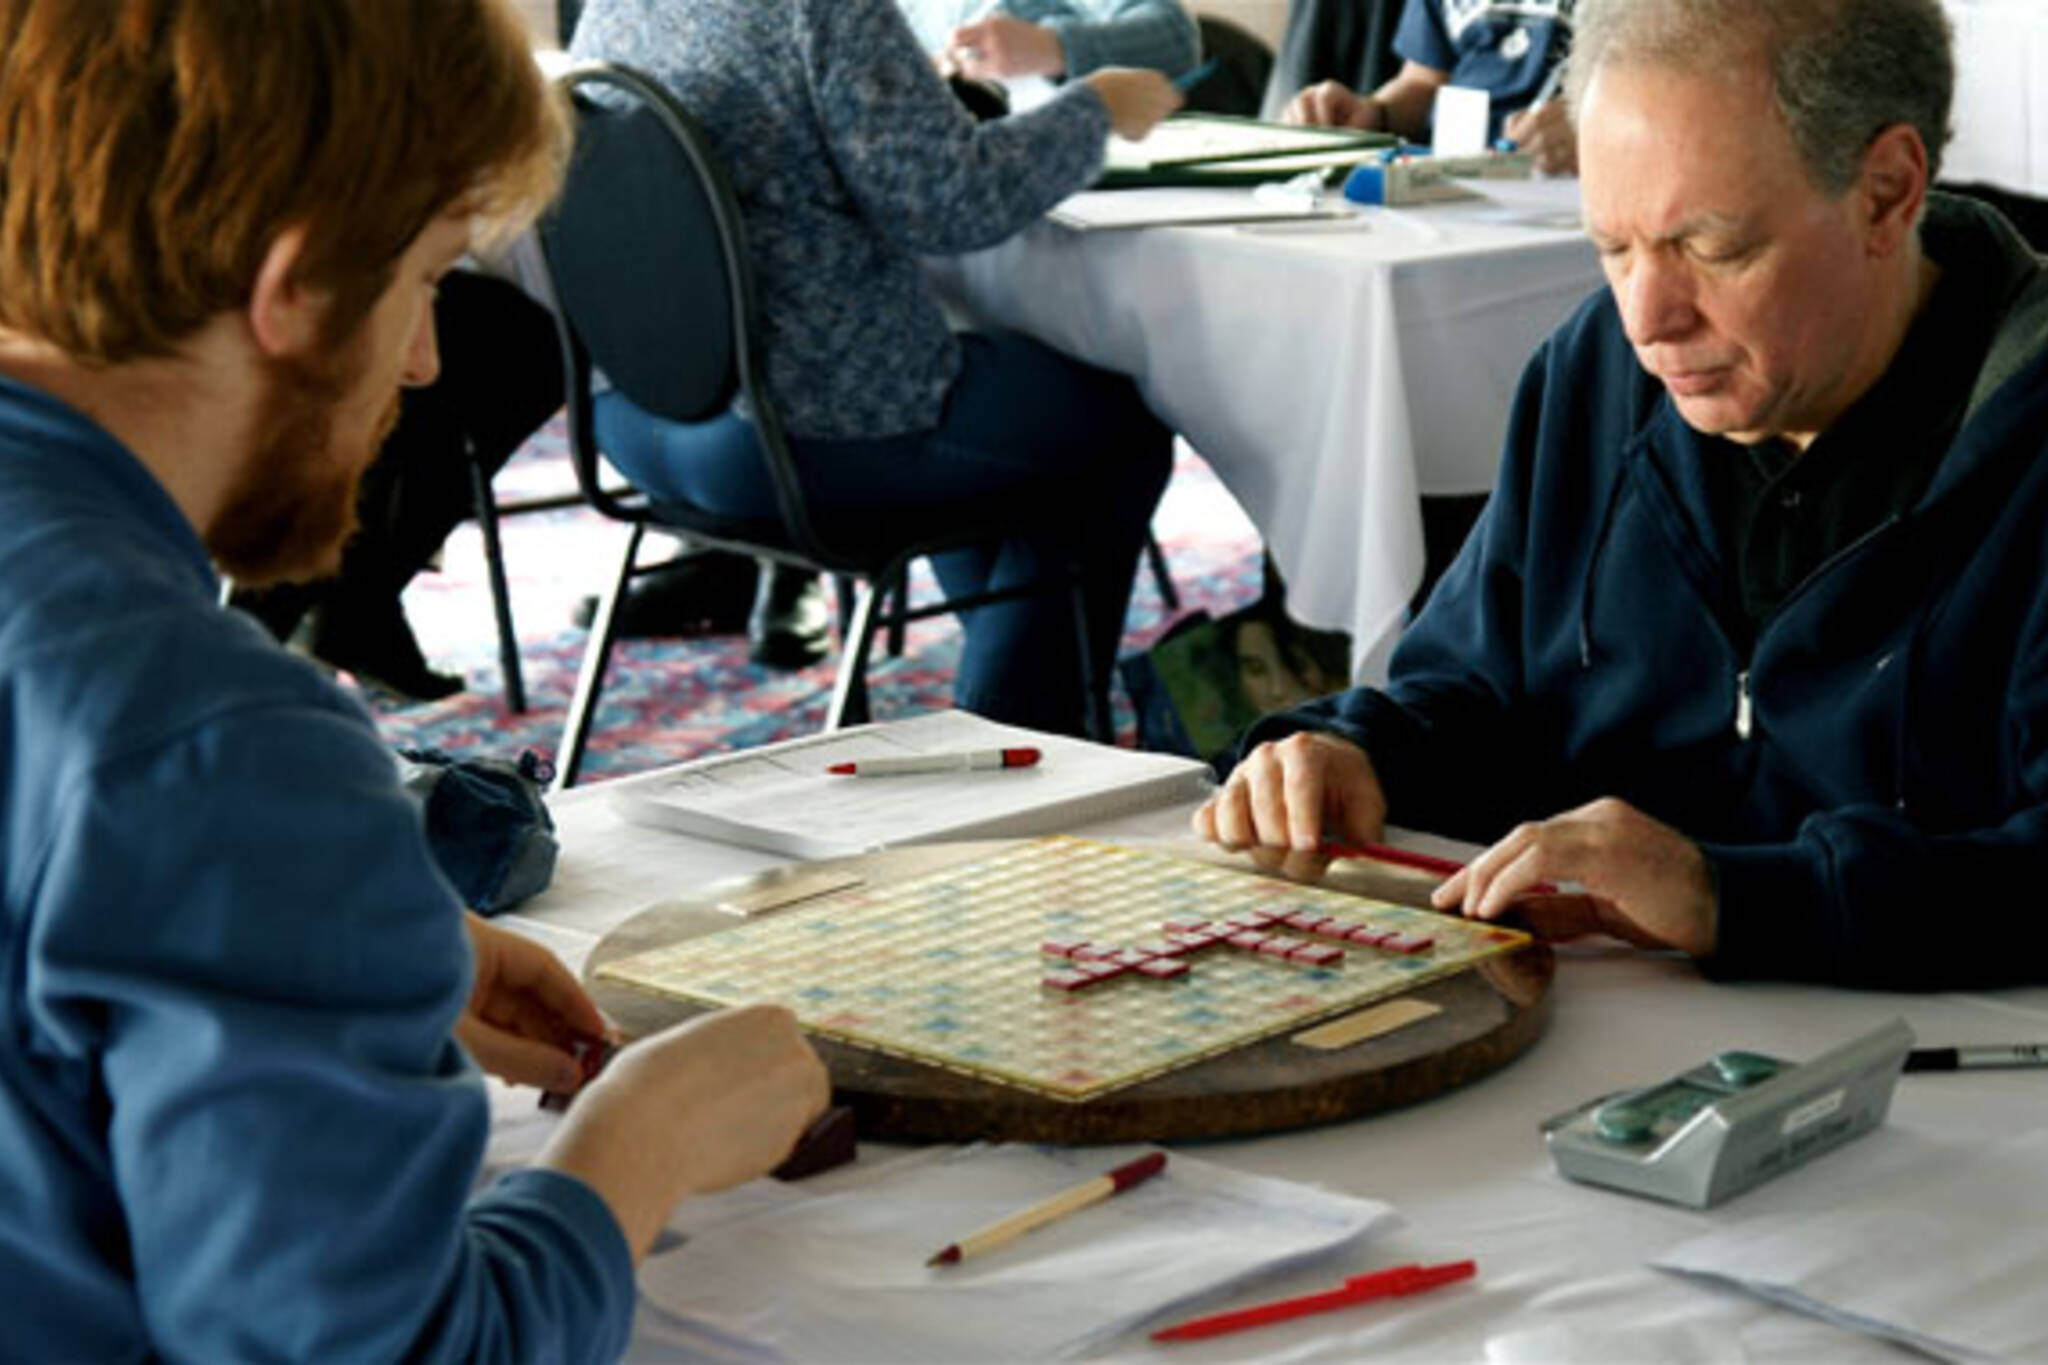 Scrabble masters Adam Logan and Joel Wapnick battle wits during the Kingston Cup tournament